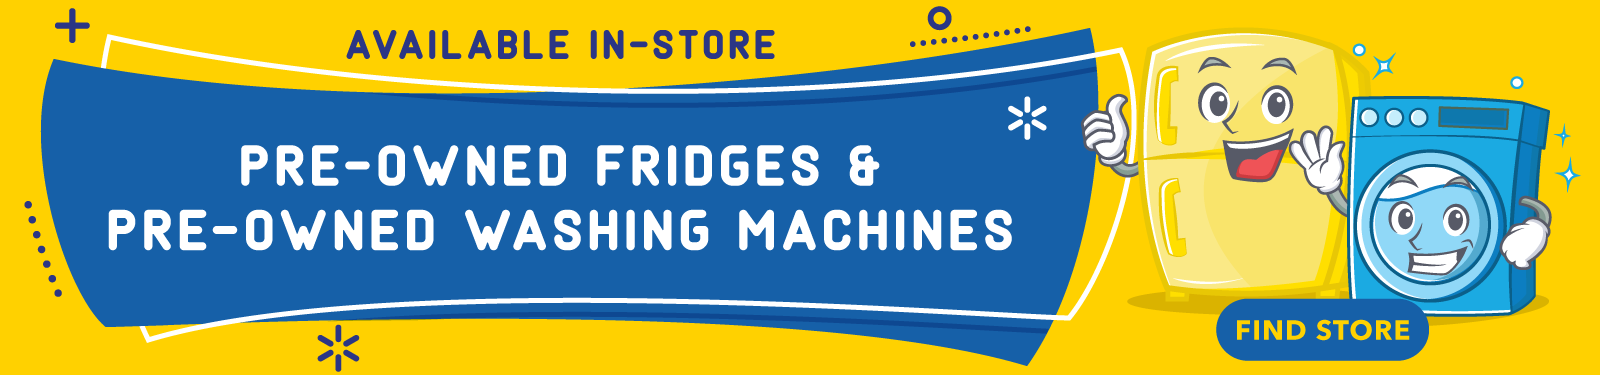 Pre-Owned Fridges & Washing Machines Available In-store at Fridge & Washer City.